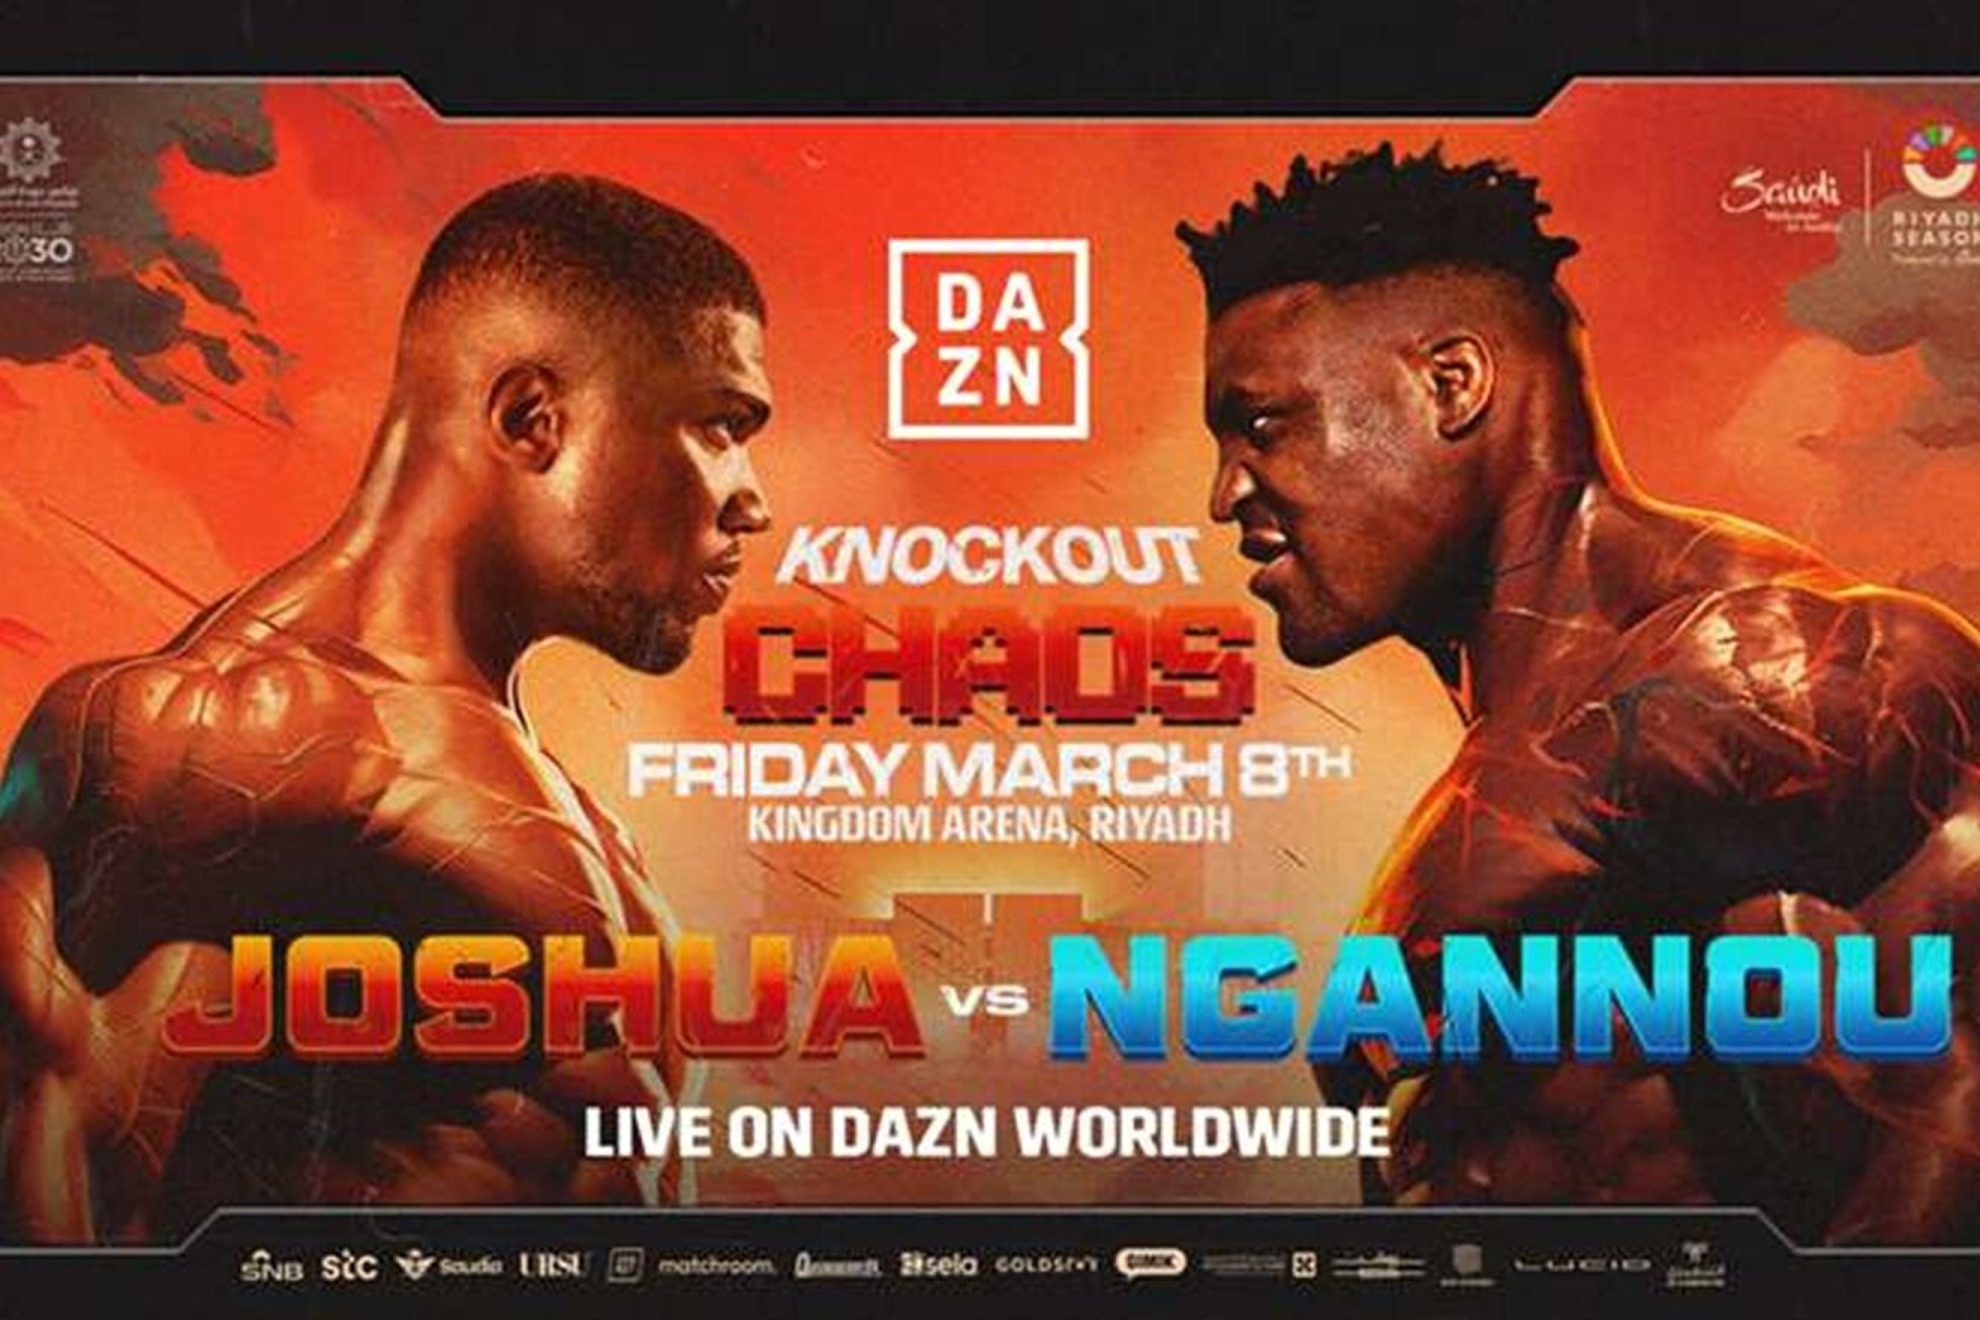 Joshua vs Ngannou to face each other on March 8 in Riyadh